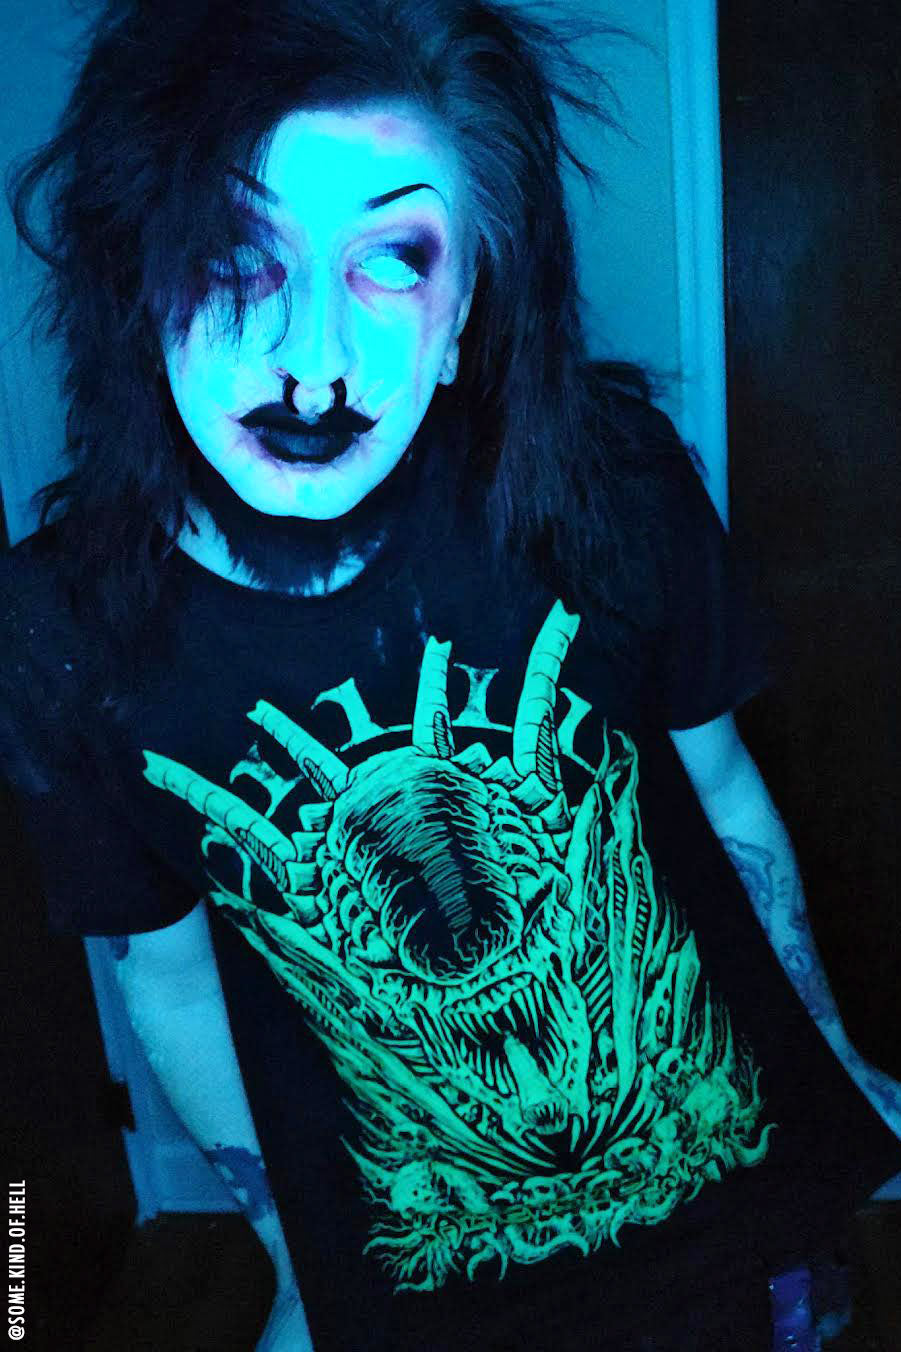 And Justice For Art - IT's HALLOWEEN, WEAR CORPSEPAINT. One of the